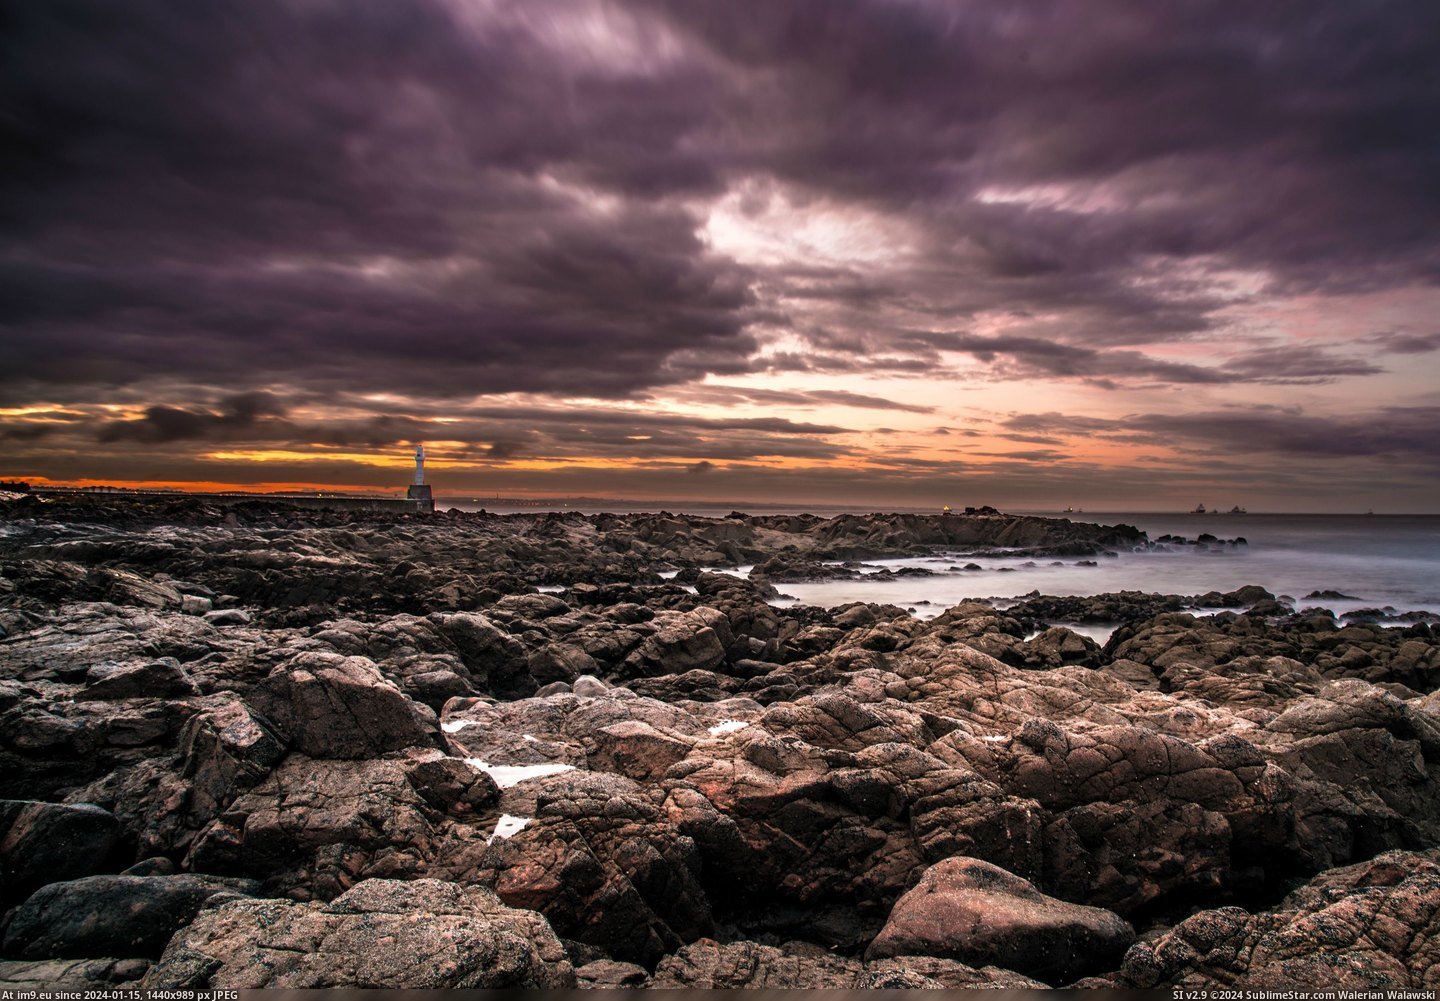 #Long #Gorgeous #Rocks #Exposure #Skies #Bay #Scotland [Earthporn] Clambered down the rocks to take this long exposure of Aberdeen bay in Scotland - some gorgeous skies on this relati Pic. (Image of album My r/EARTHPORN favs))